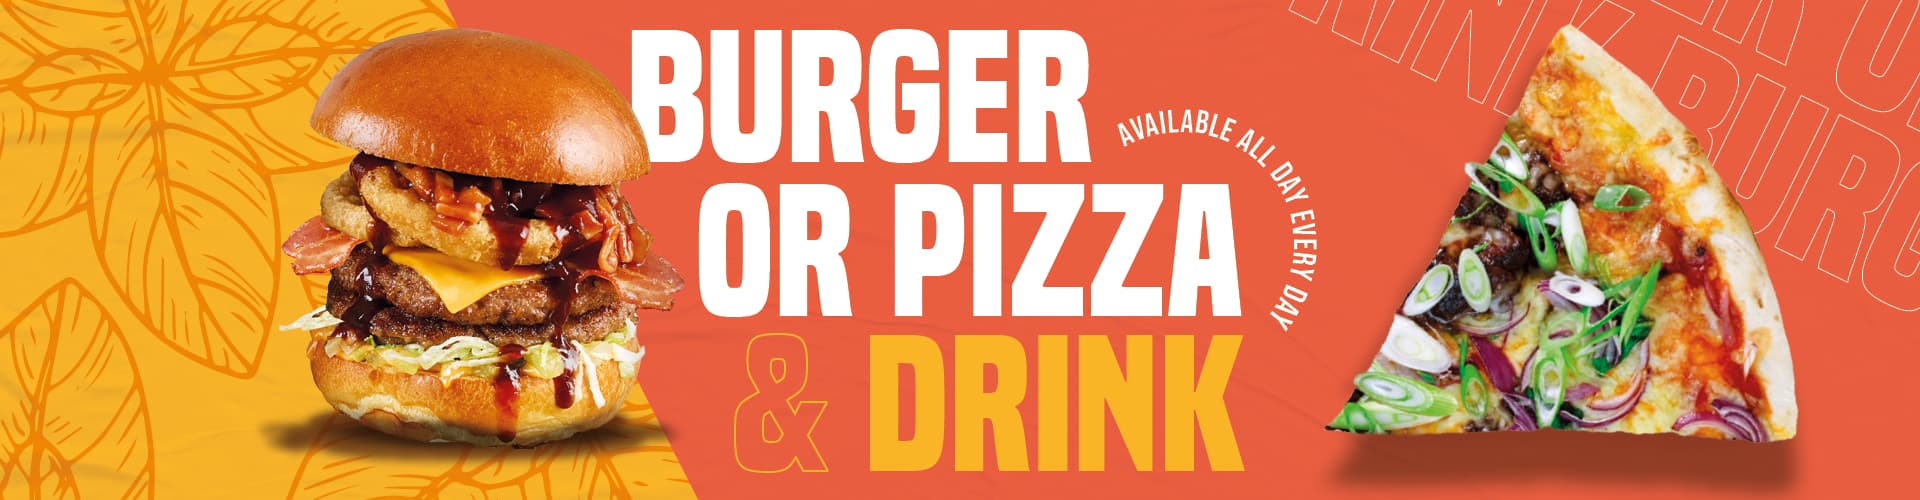 Burger or Pizza & Drink, available all day every day